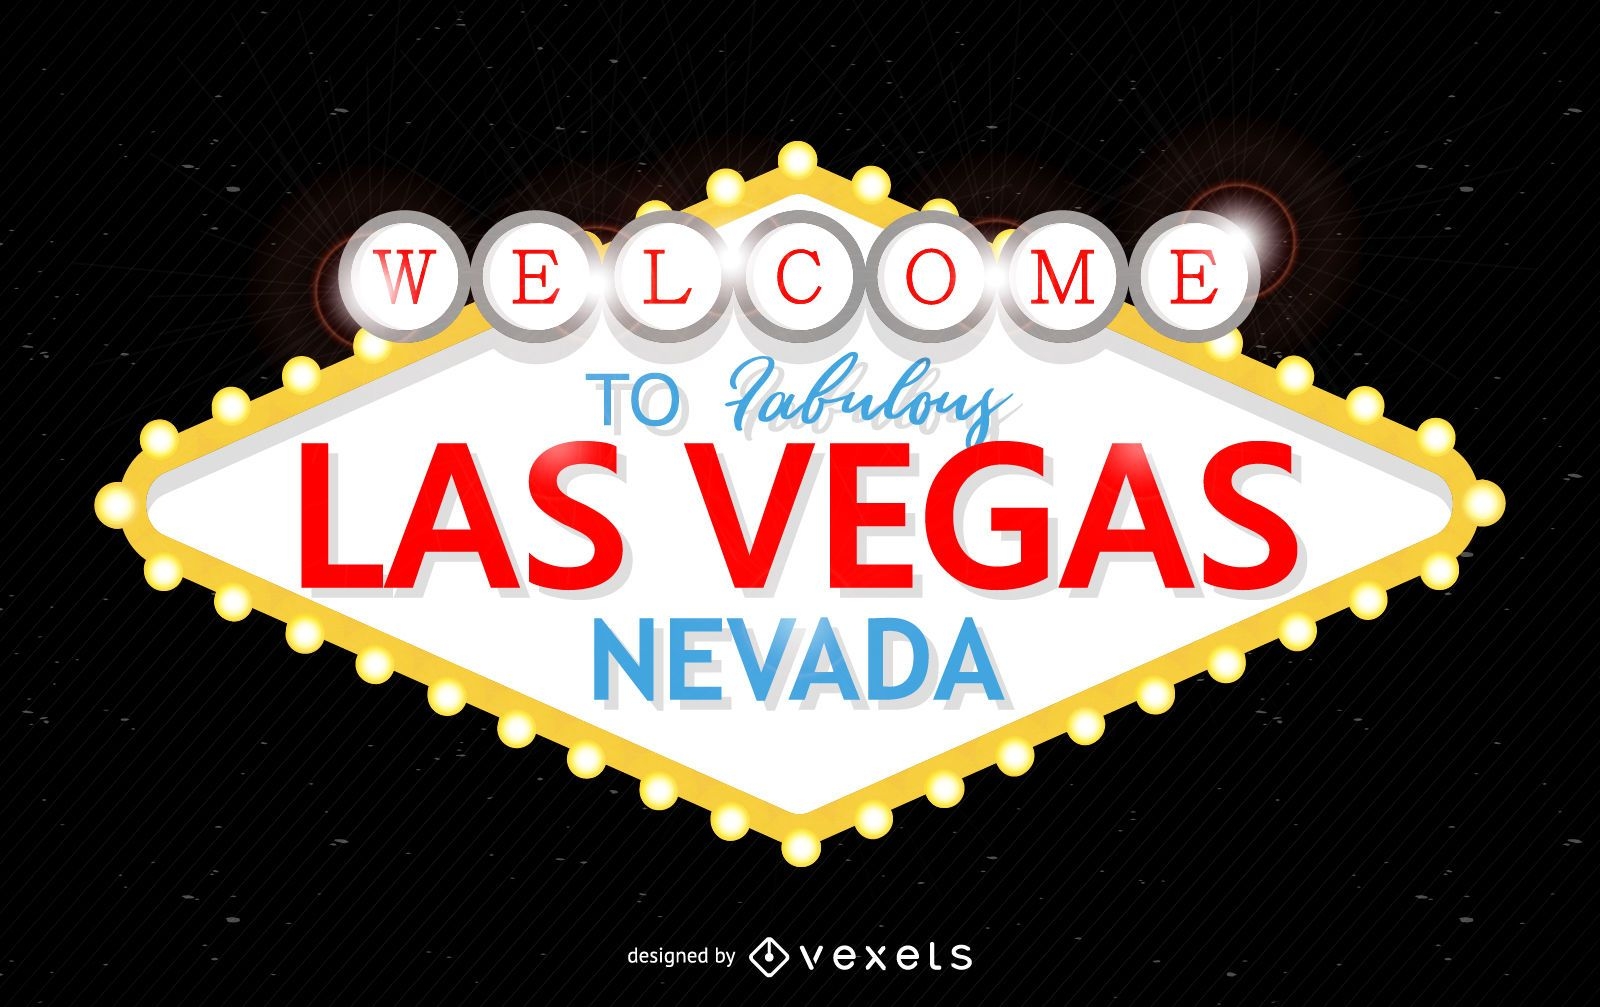 Welcome to Fabulous Las Vegas sign